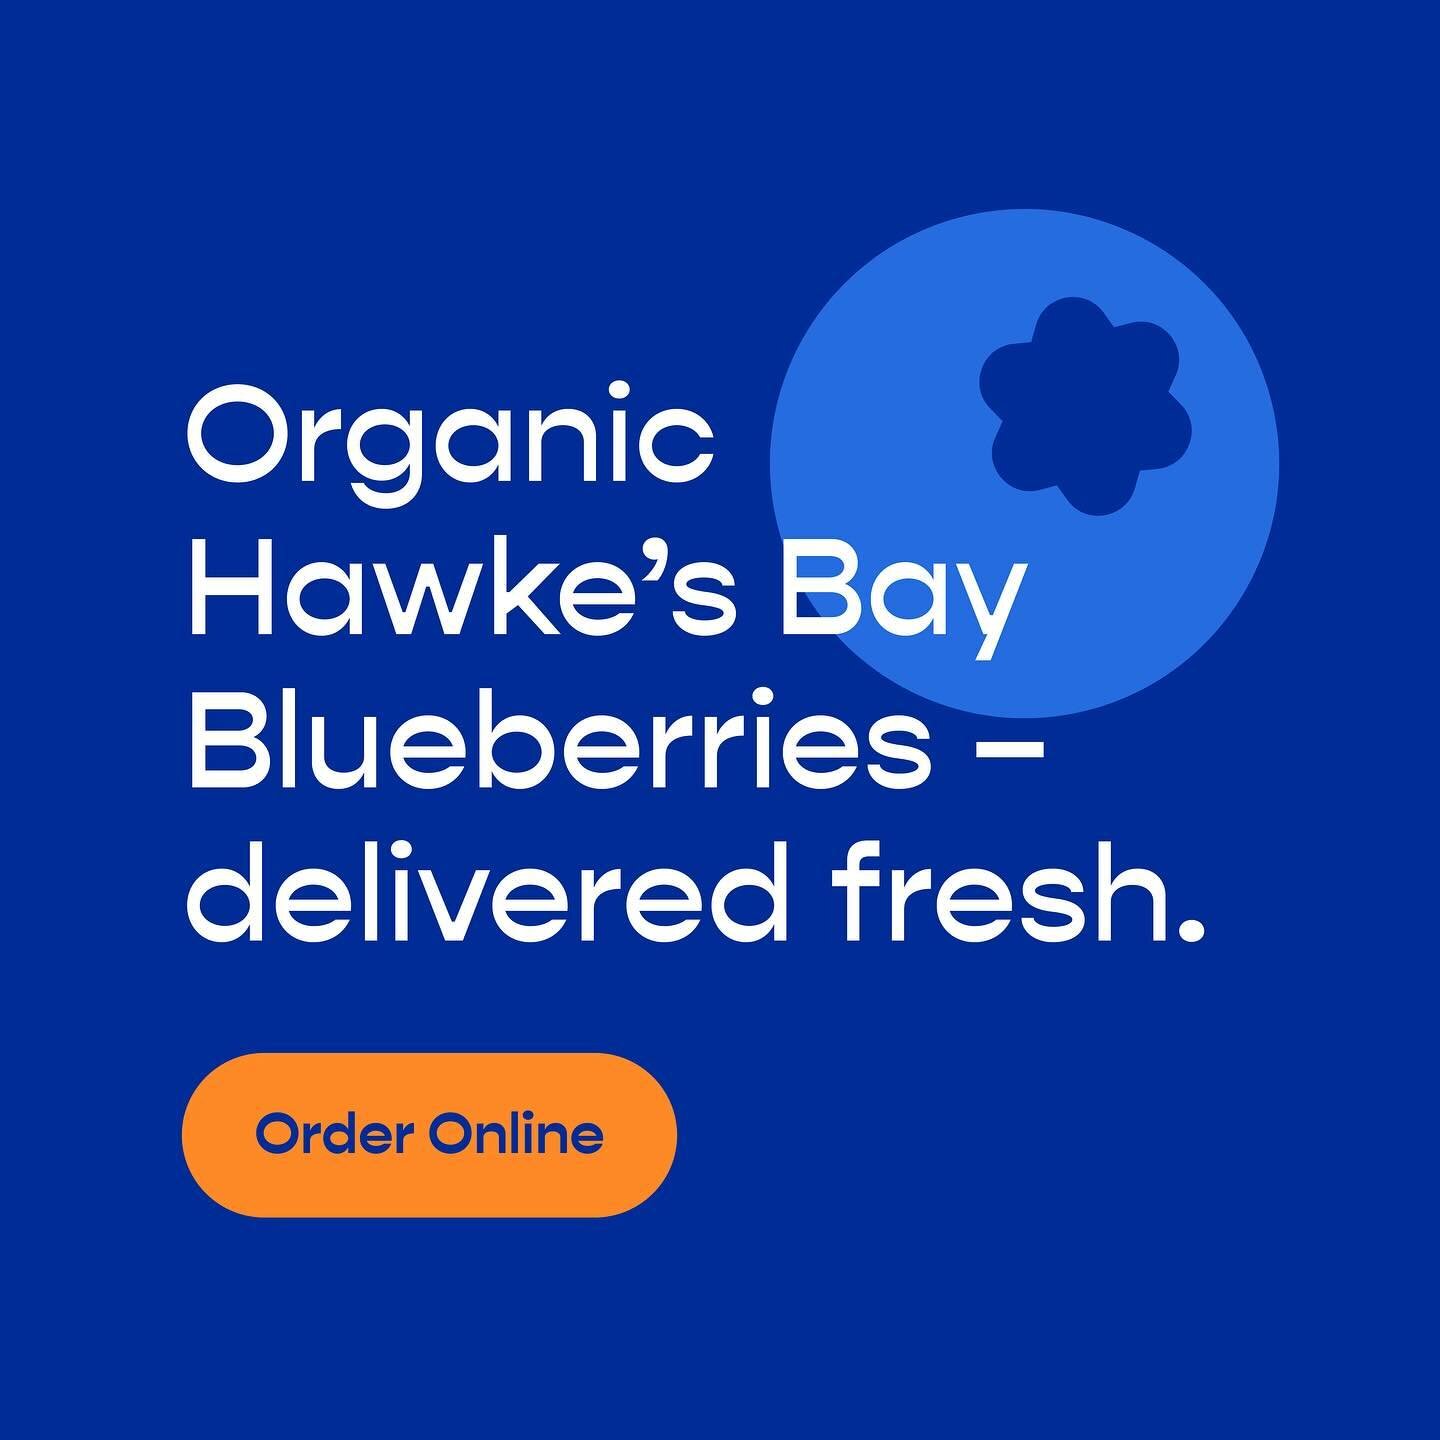 Boost your day with the Berry best!
Picked and delivered fresh, order your blueberries online now! 

Link in bio🫐

#trueearth #trueearthblueberries #blueberryharvest #nzgrown #nzblueberries #blueberriesnz #blueberries #blueberry #superfruit #antioxi